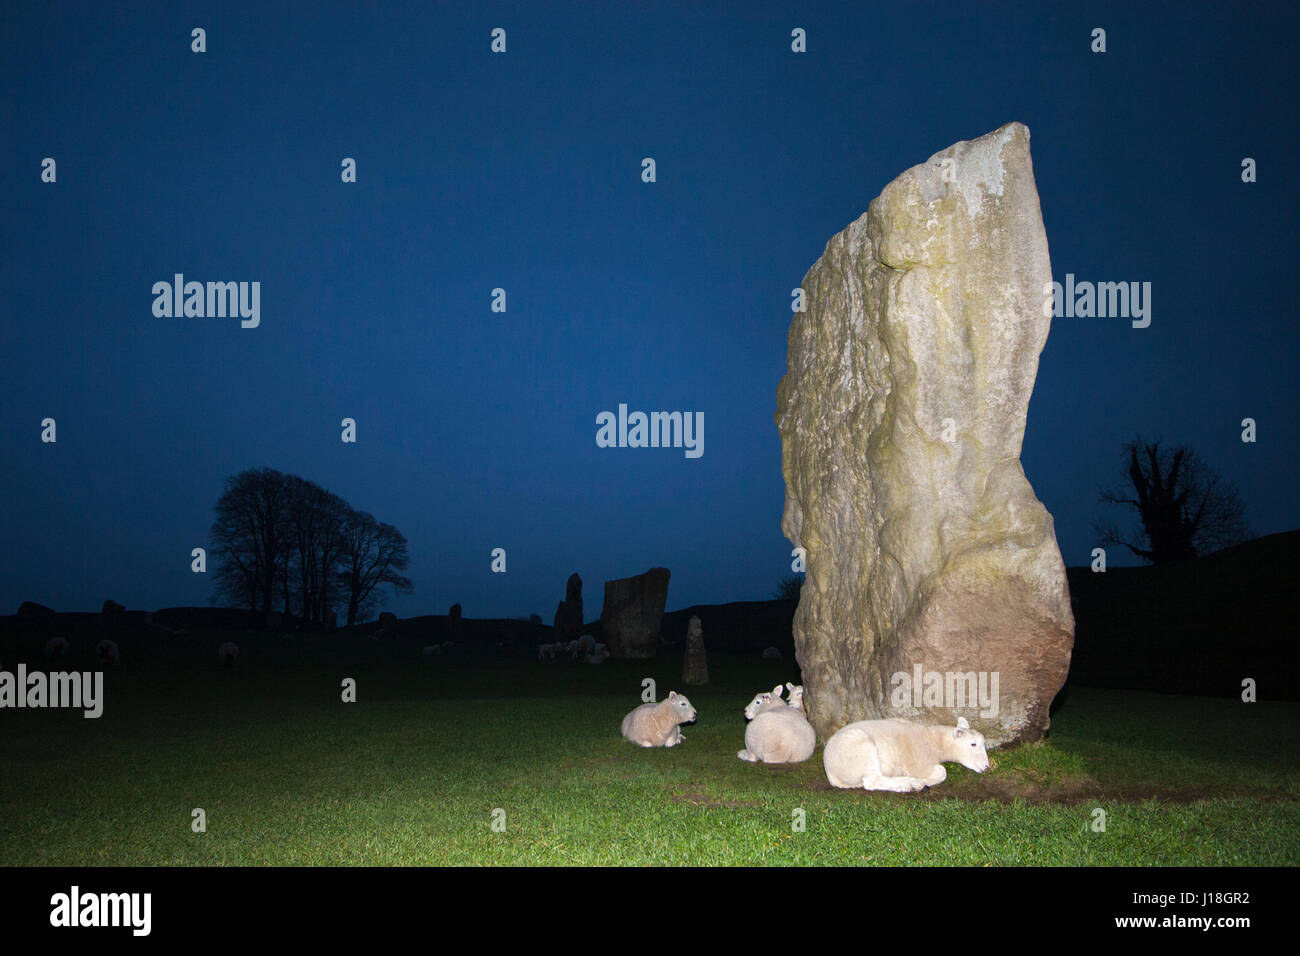 Lambs sheltering beside a giant standing stone in Avebury stone circle at night Stock Photo